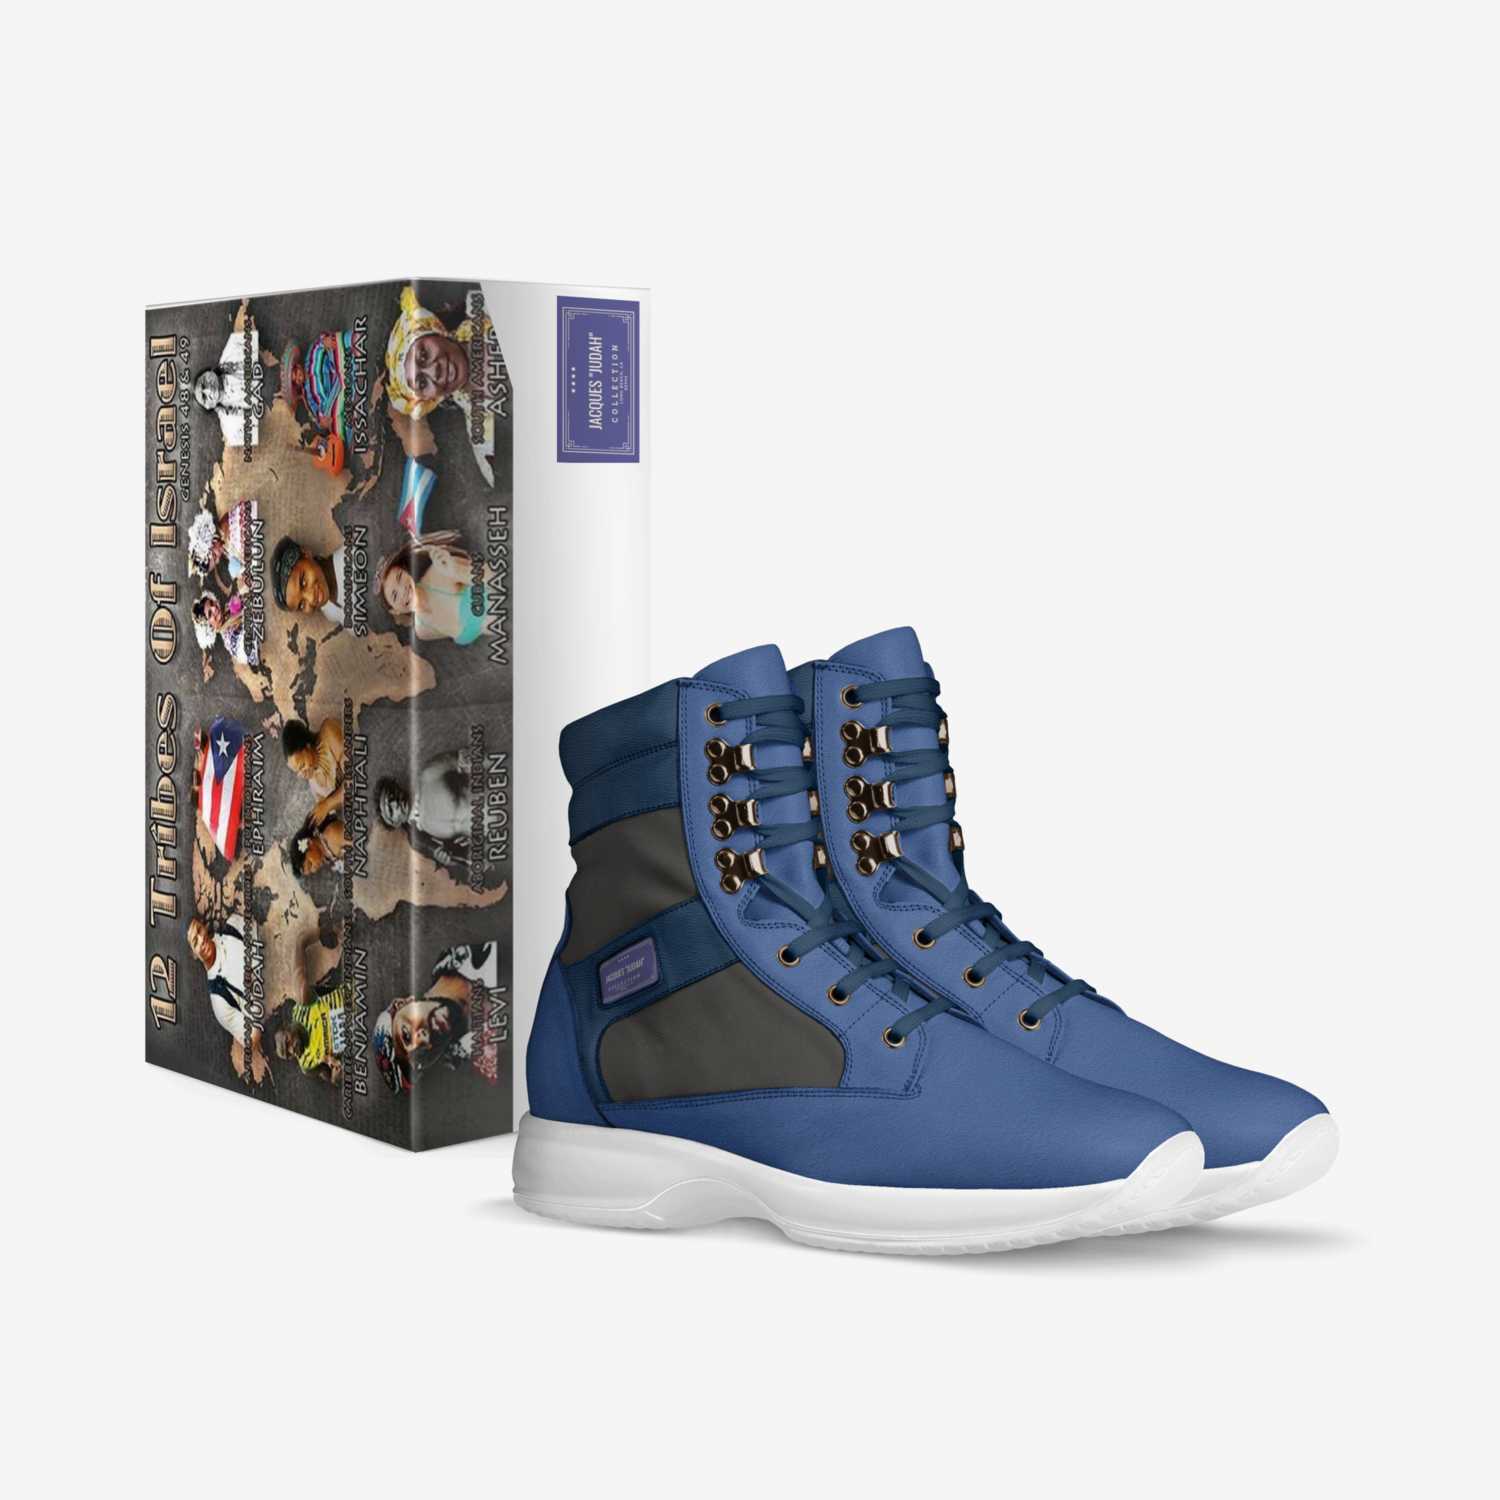 JACQUES Israelites custom made in Italy shoes by Andre Butler | Box view